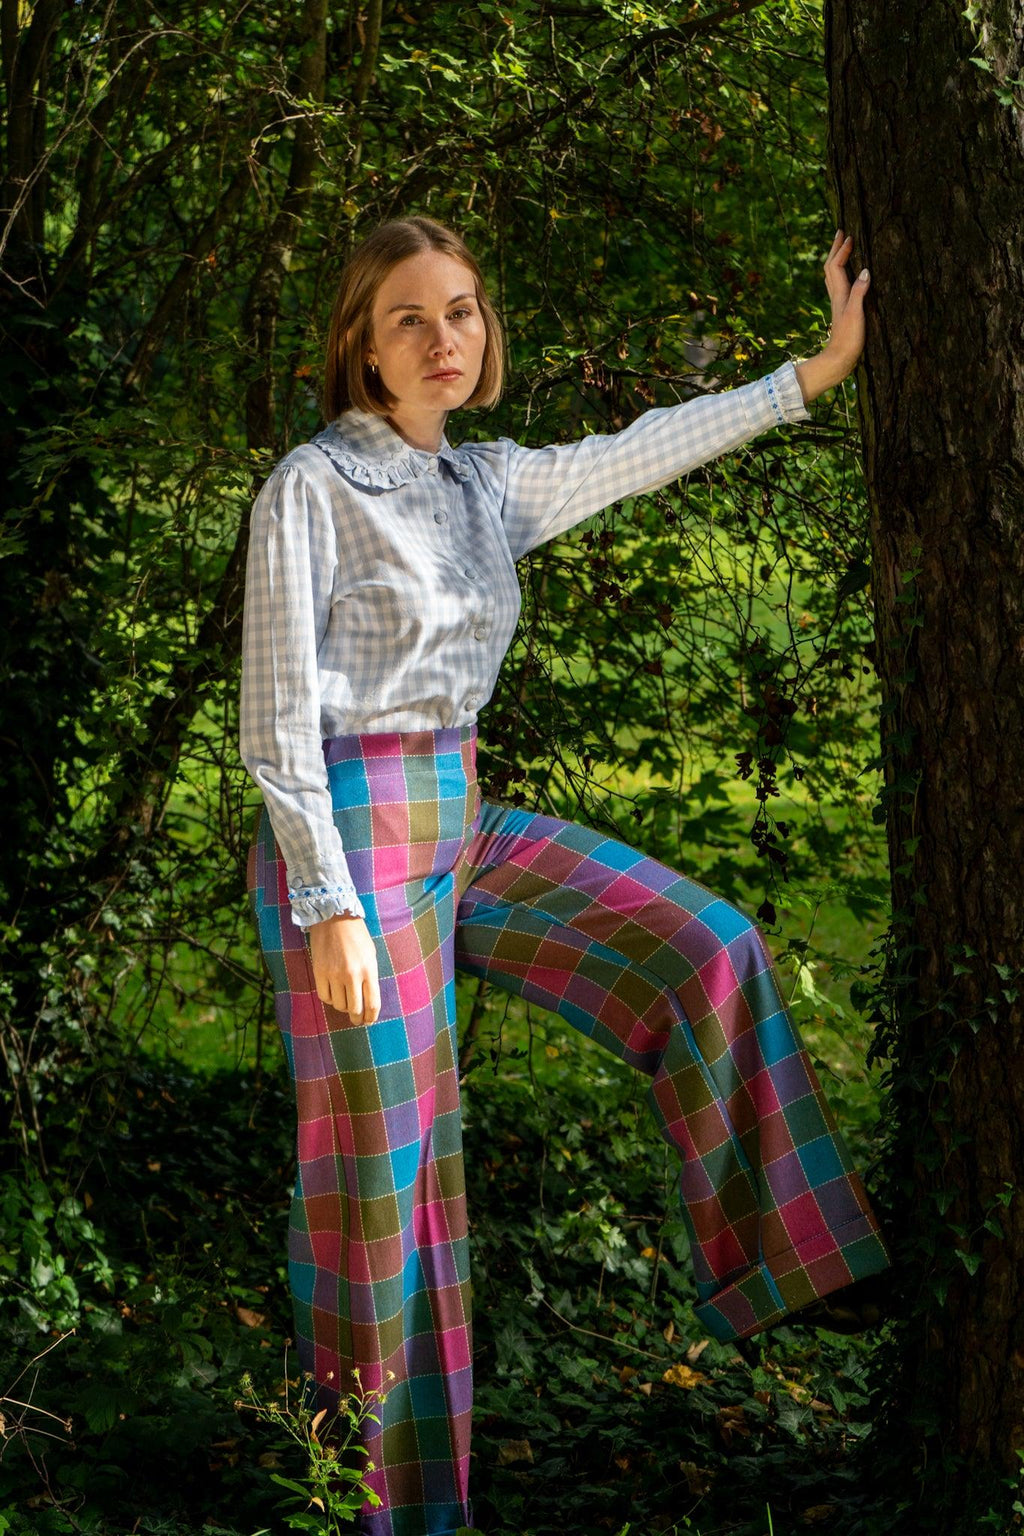 Soufflé turned up pants - pop checked wool - Gingham Palace